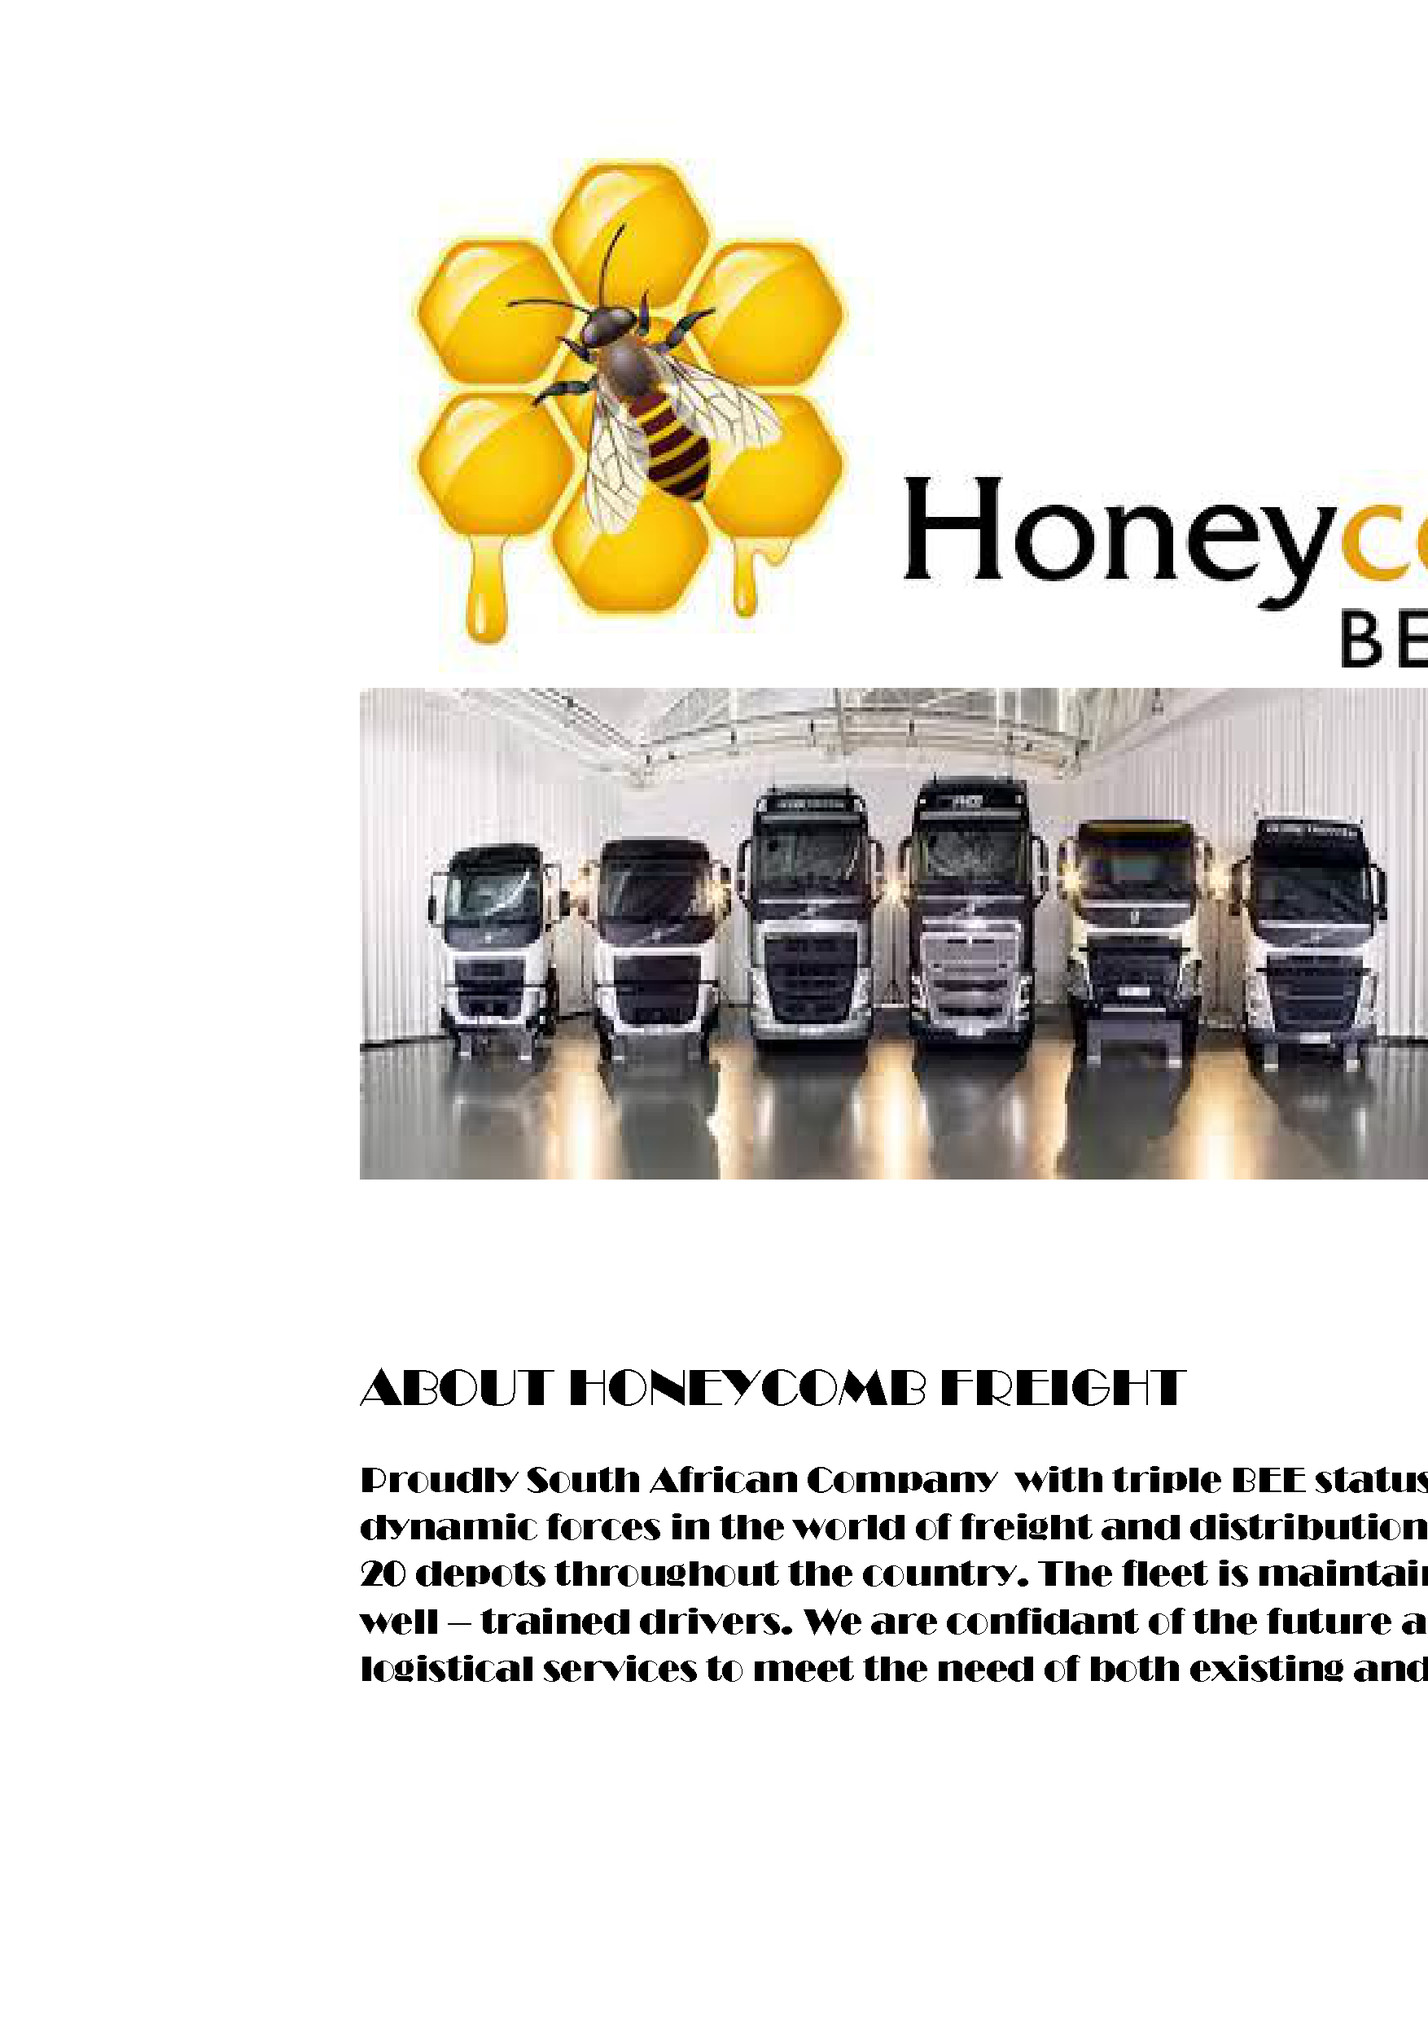 ABOUT HONEYCOMB FREIGHT